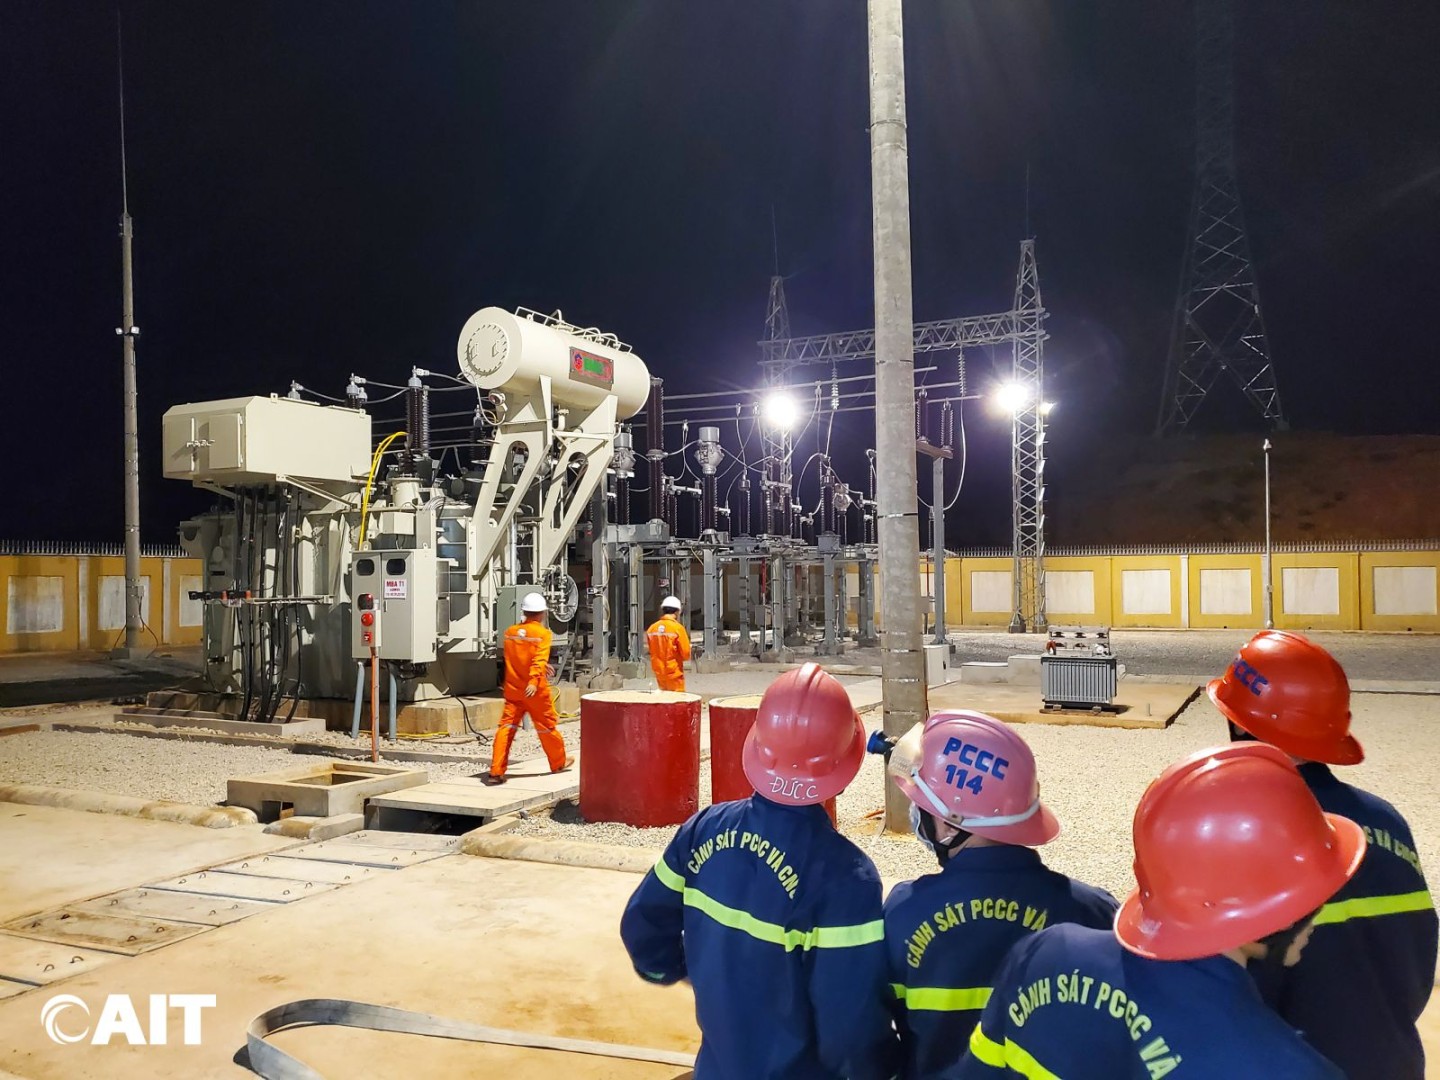 Project of 110kV Van Canh substation